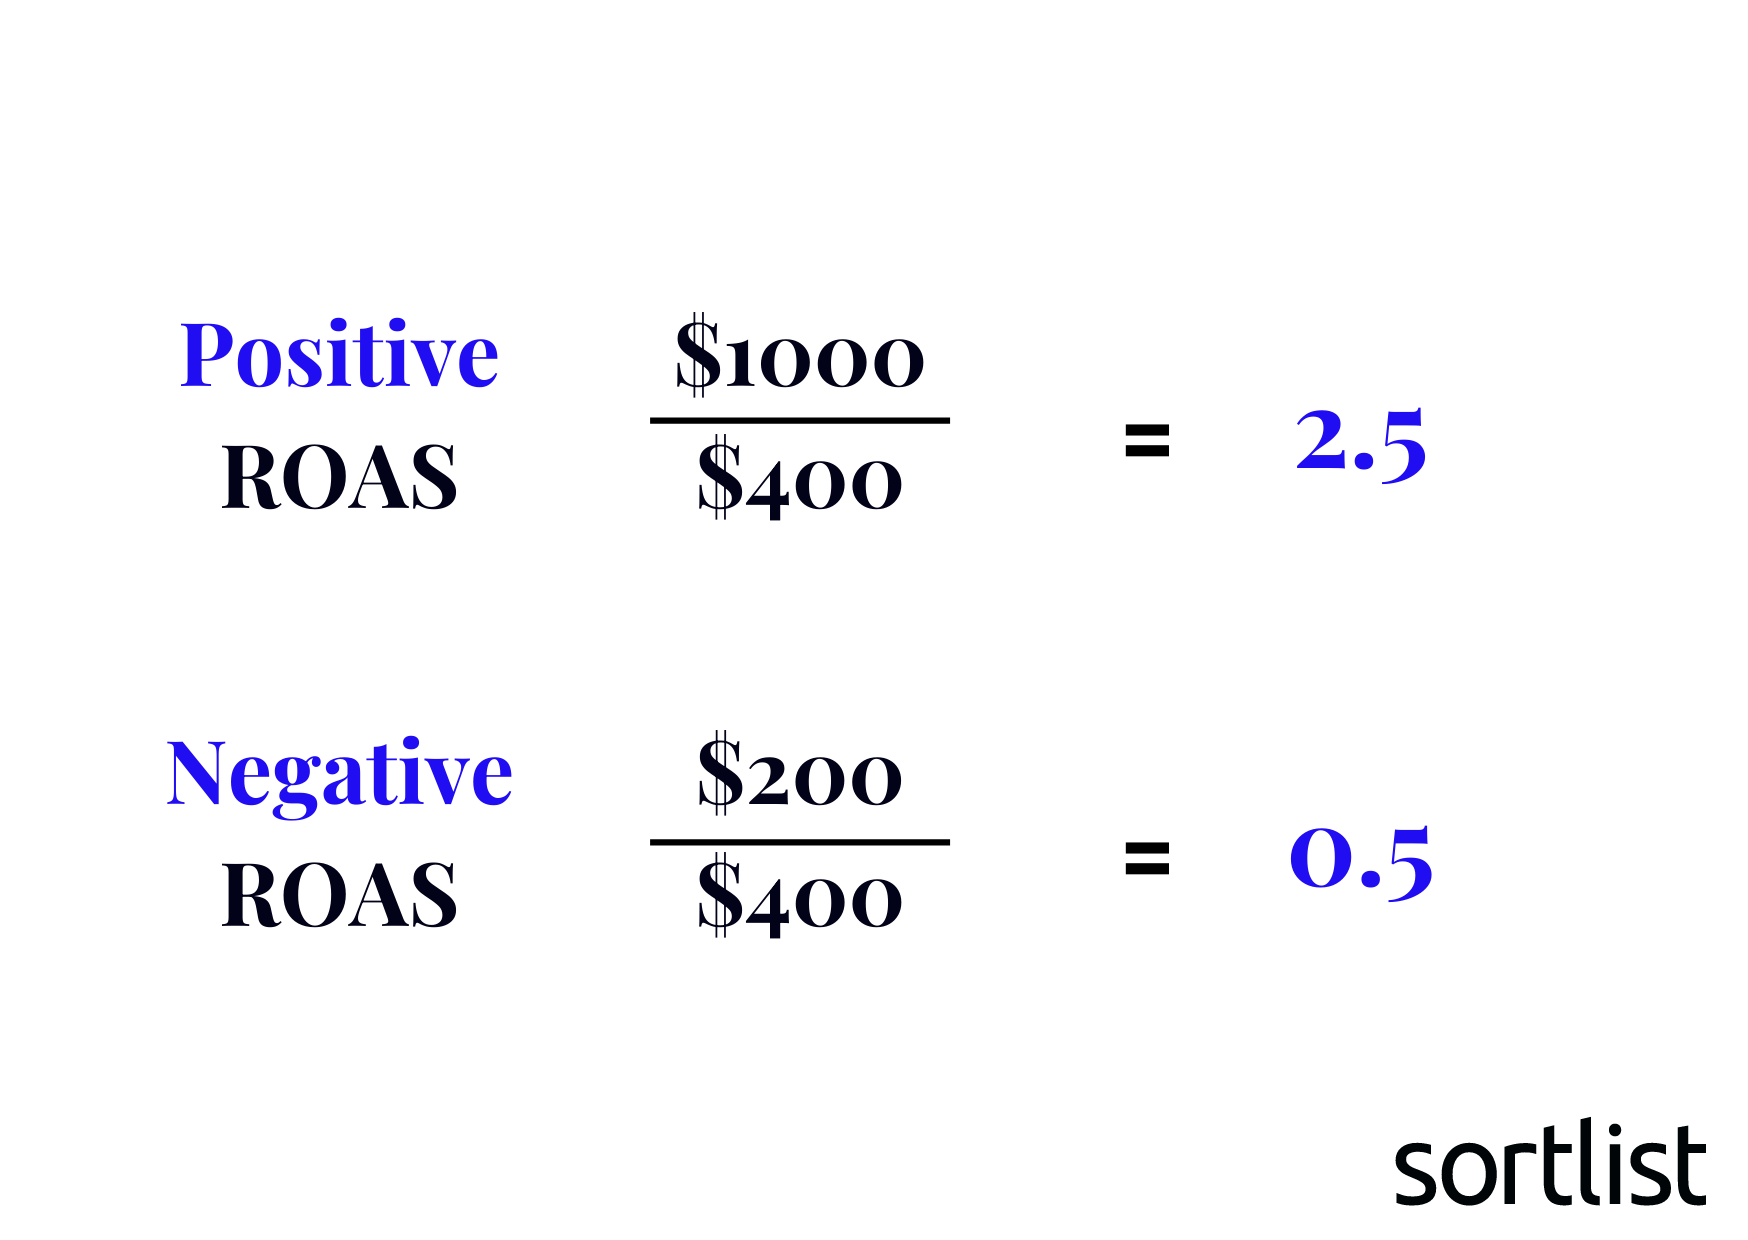 Positive and negative ROAS